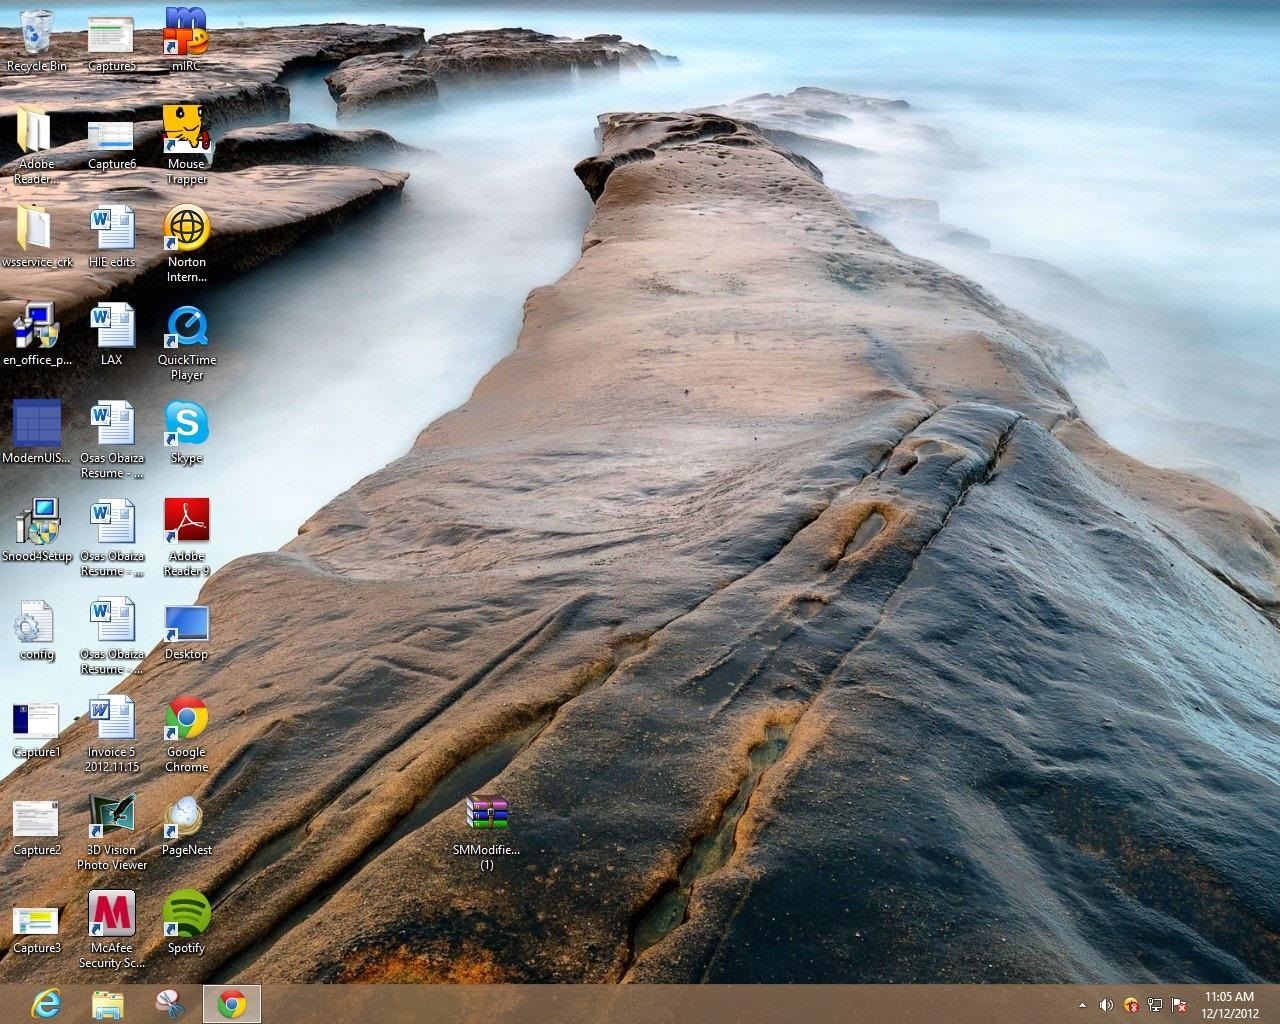 How to Get the Windows 8 Desktop and Start Screen (Or Taskbar and Start Screen) on the Same Display